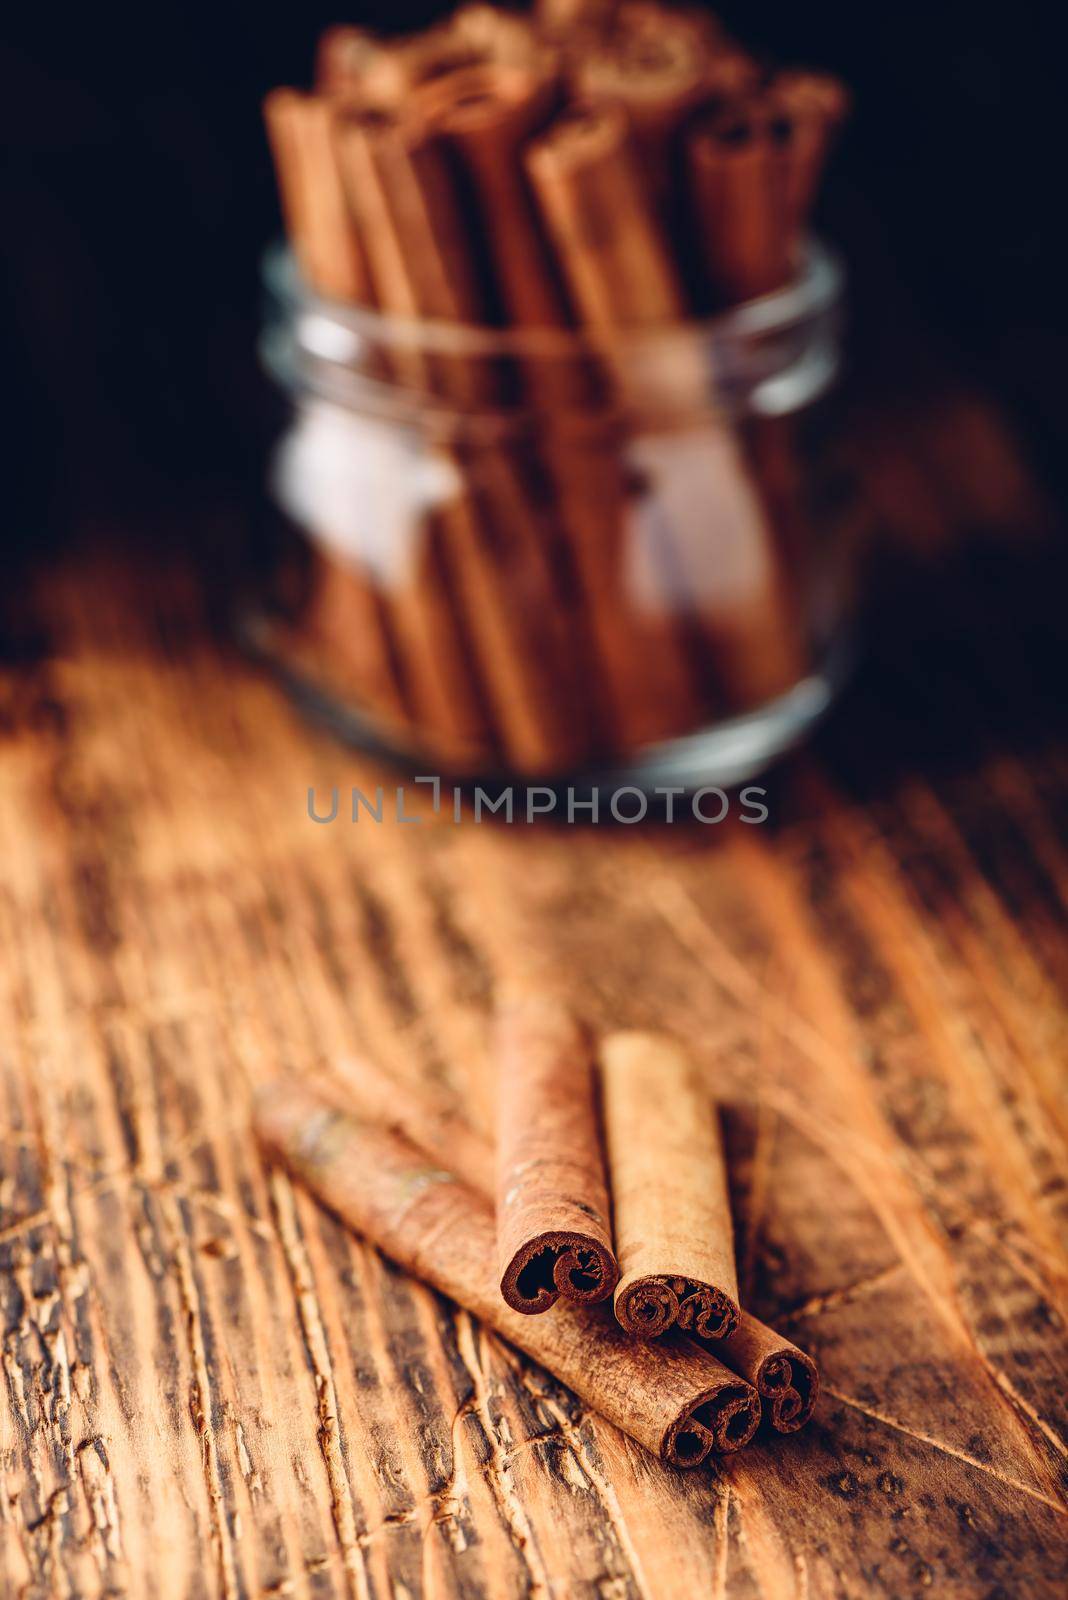 Cinnamon sticks in a glass jar over rustic wooden surface